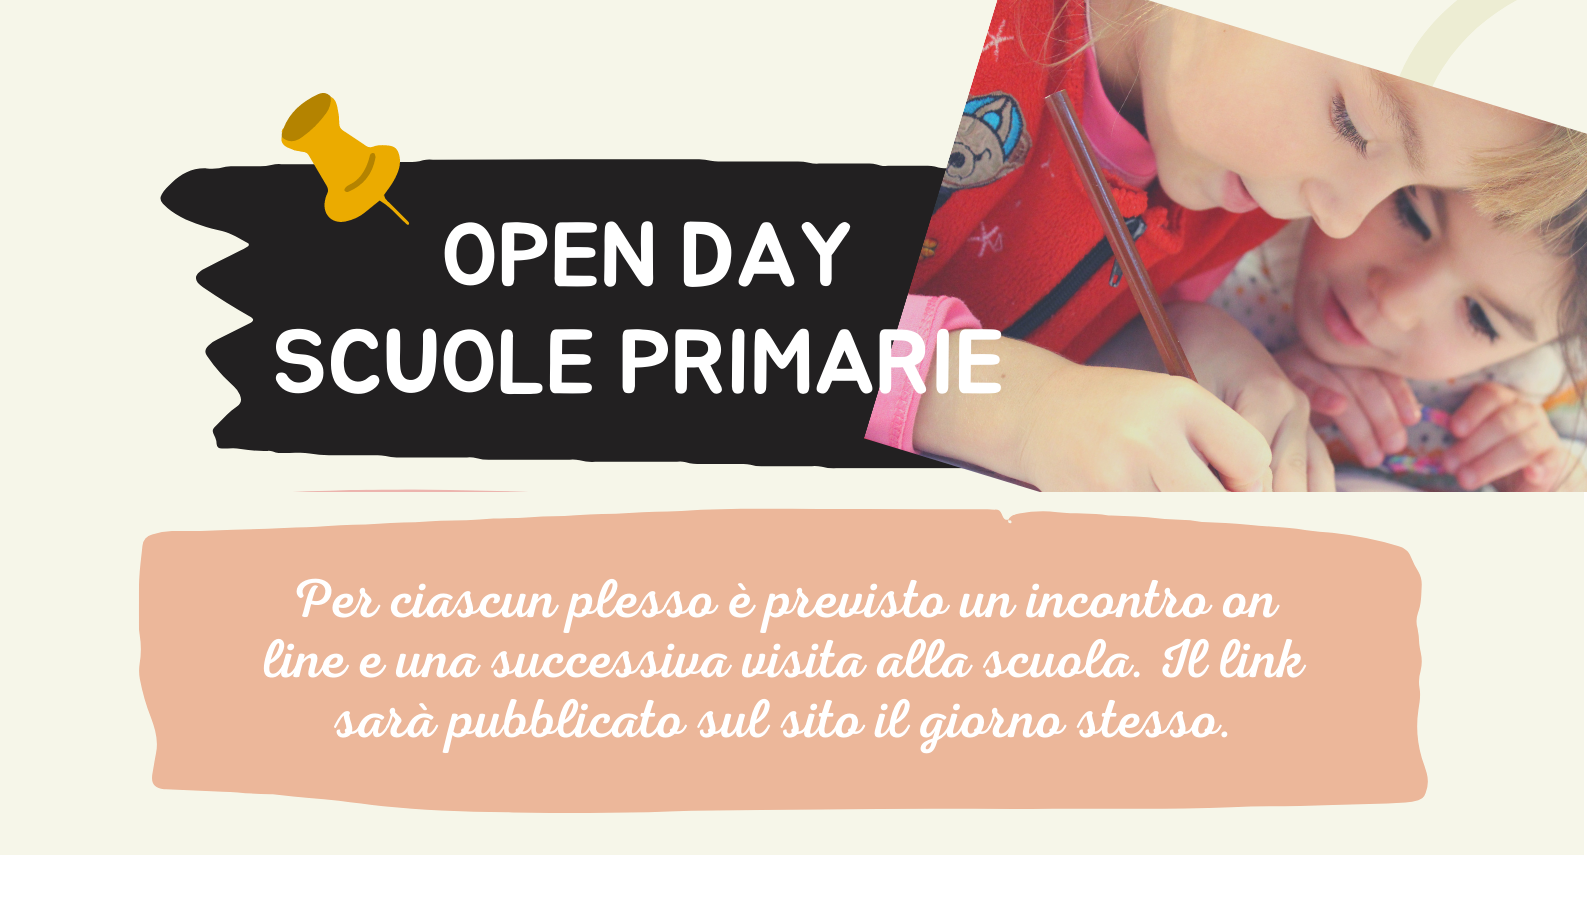 Open day scuole primarie pic.png